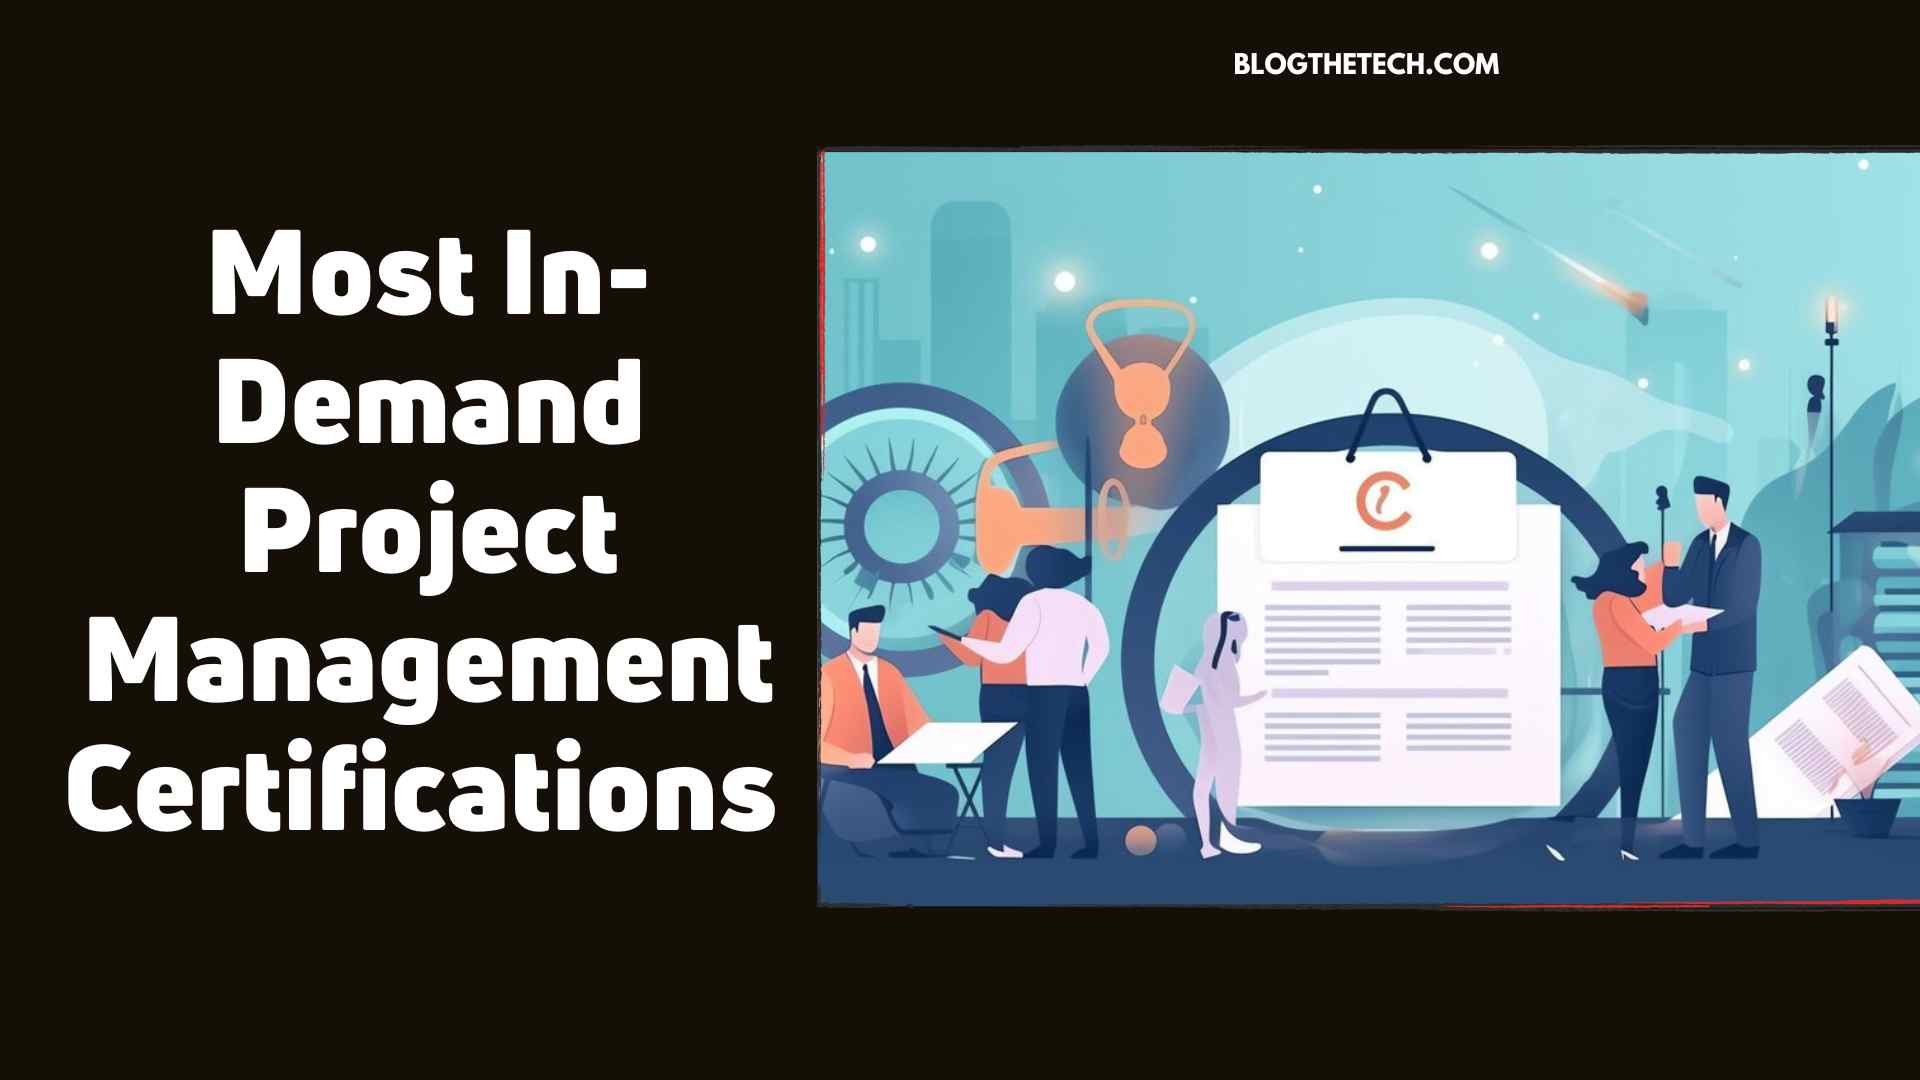 Most In-Demand Project Management Certifications